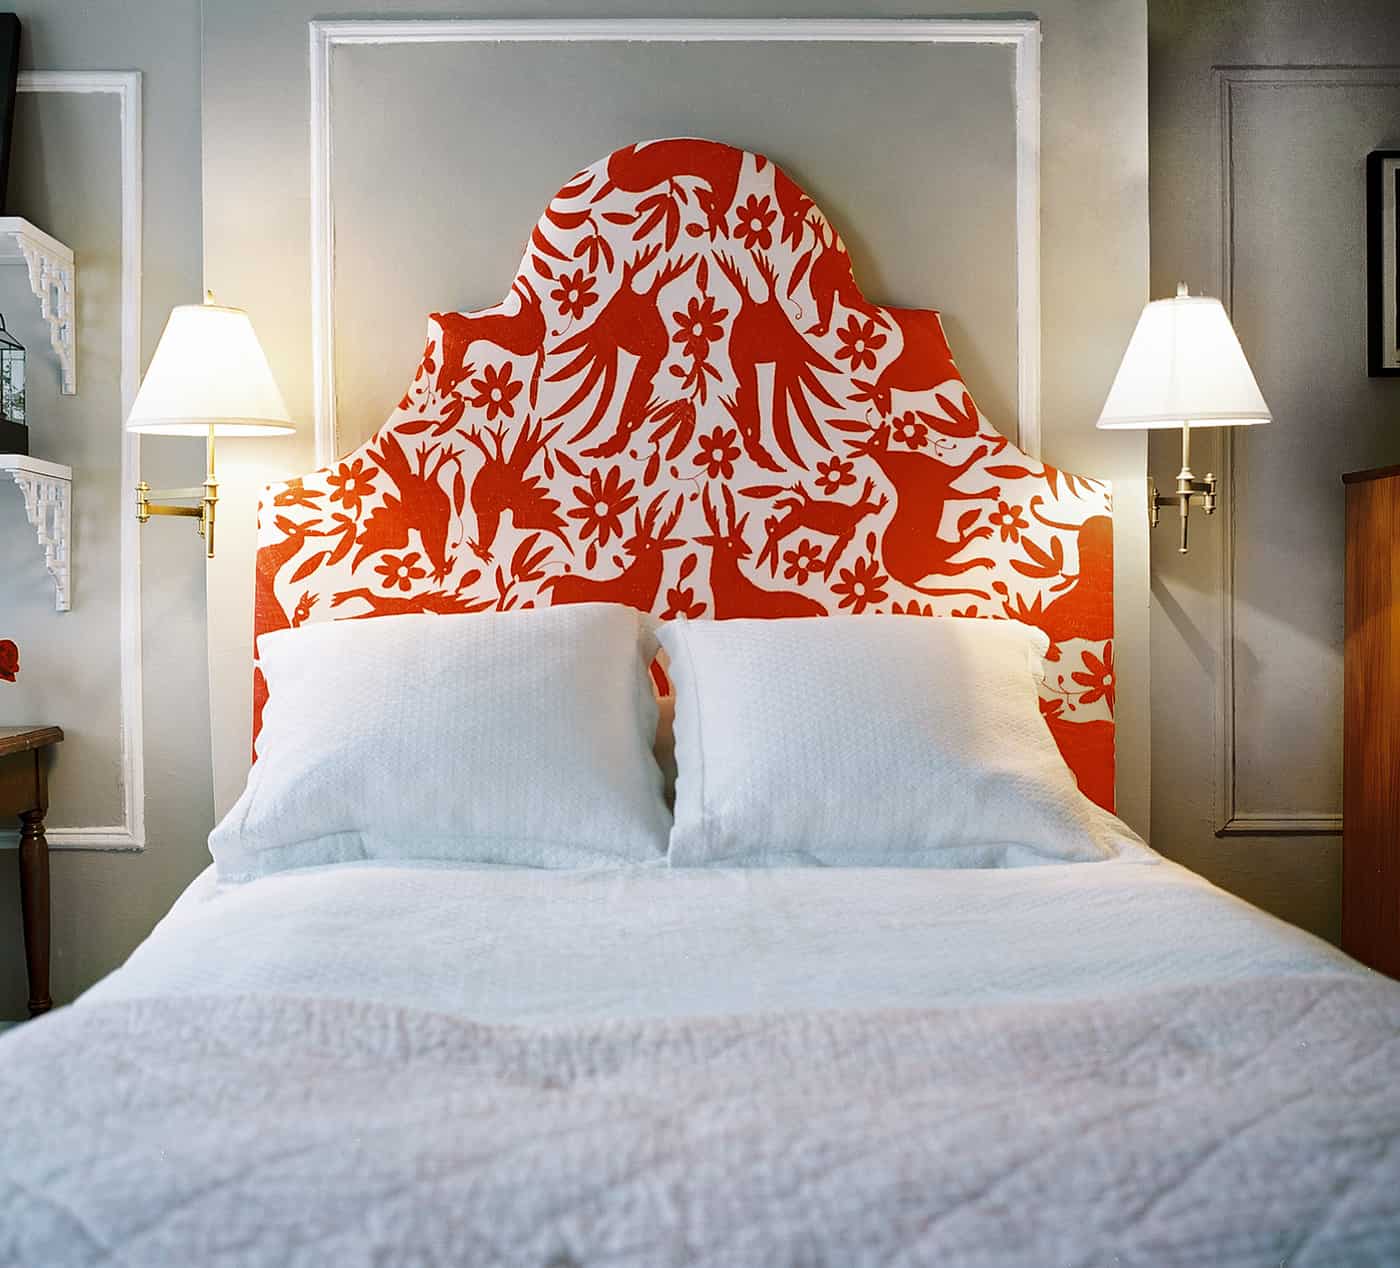 The beauty of having red as part of your headboard is how powerful the color is on its own.